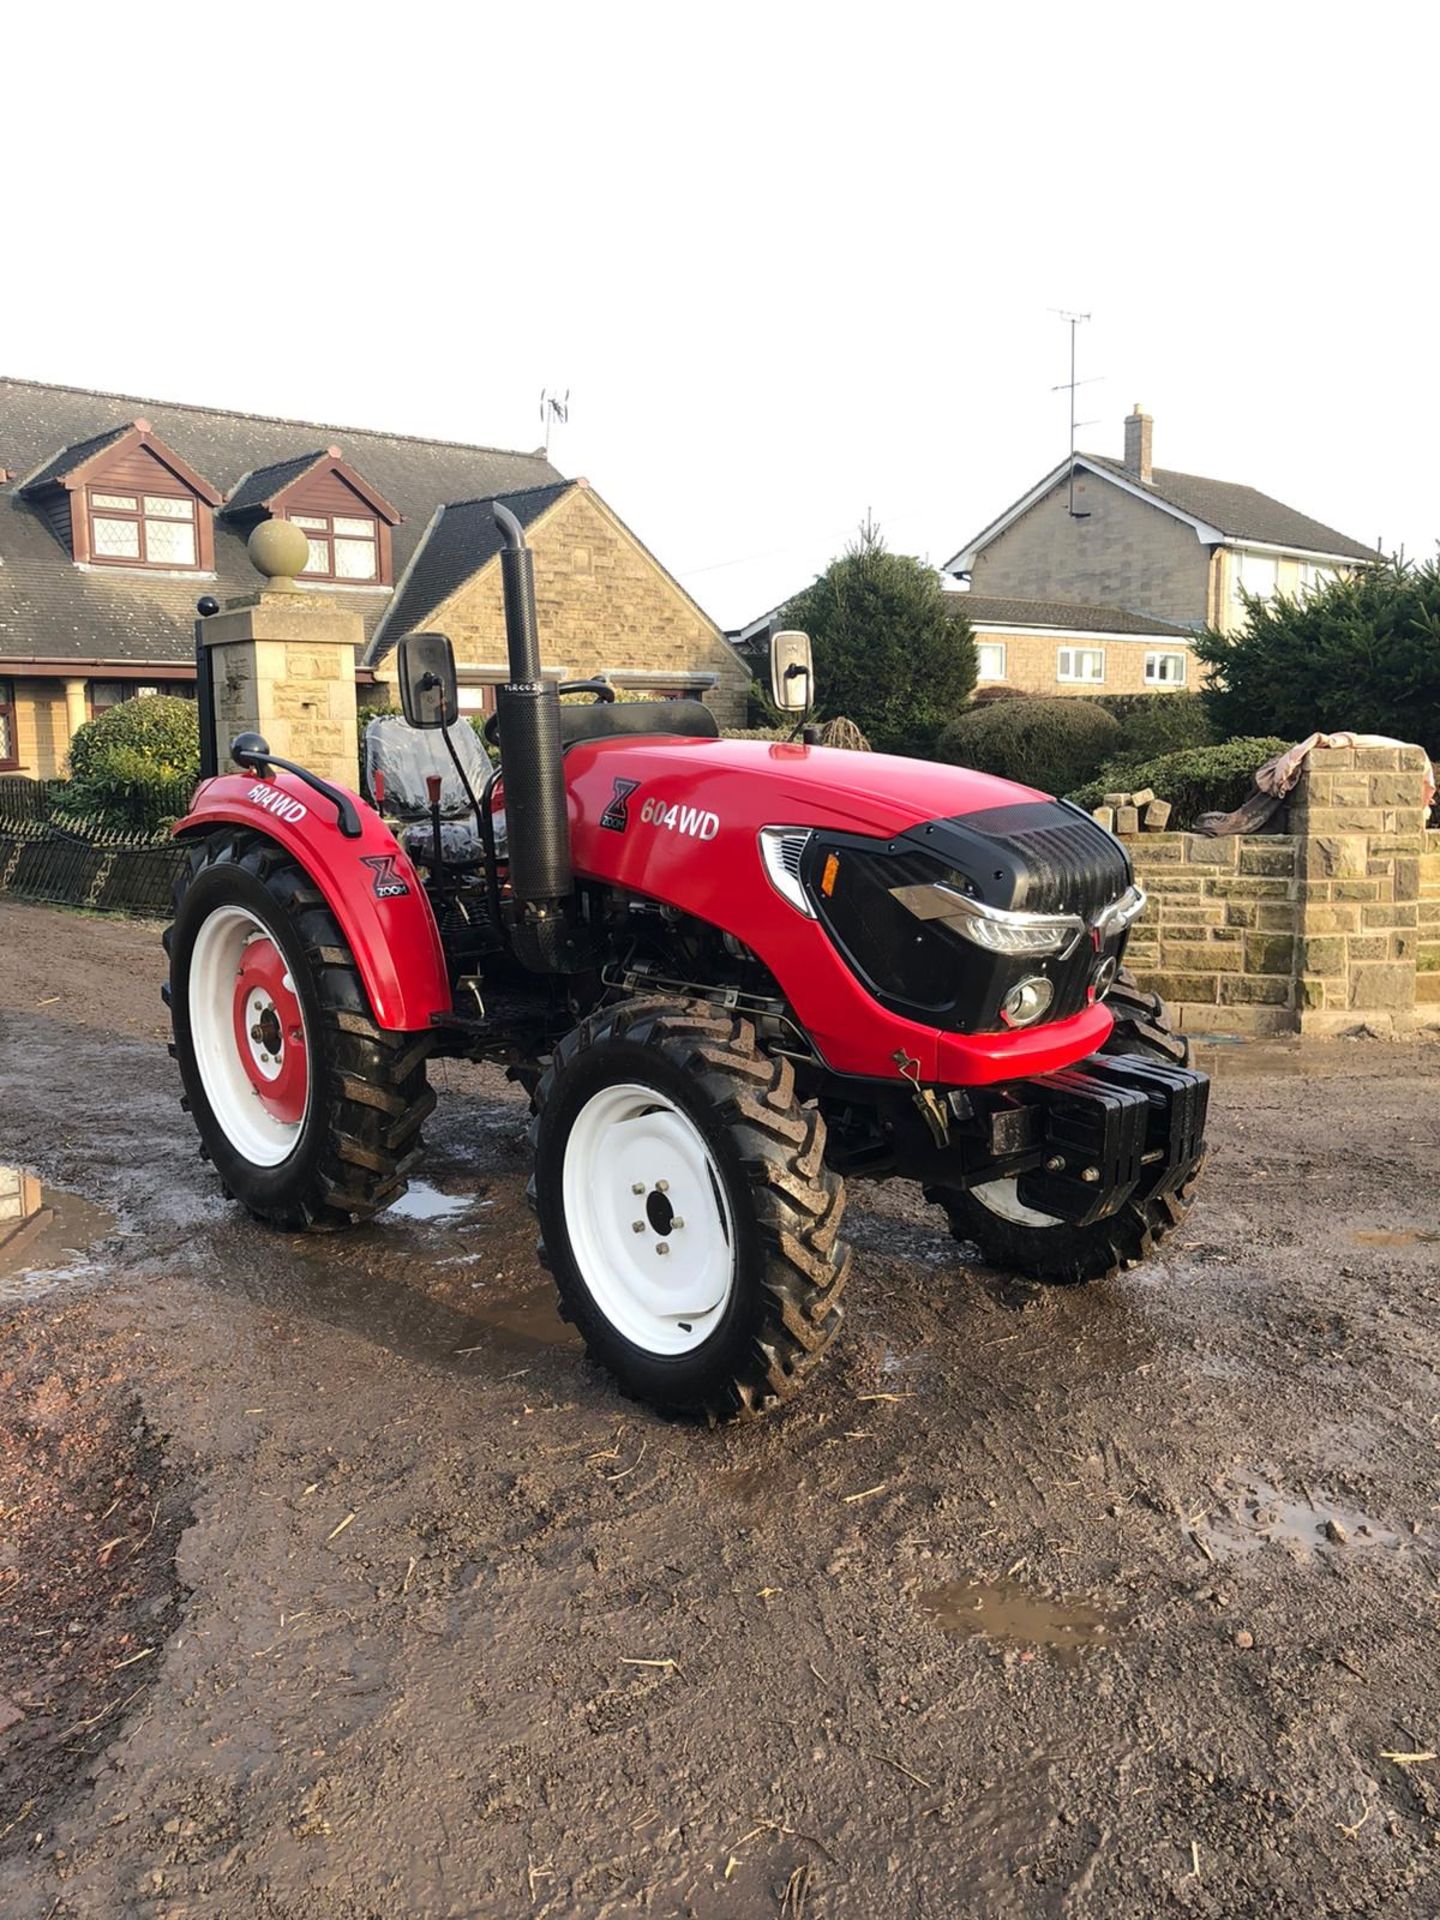 NEW / UNUSED ZOOM 604WD TRACTOR, YEAR 2019, RUNS, WORKS AND DRIVES, 3 POINT LINKAGE, REAR PTO